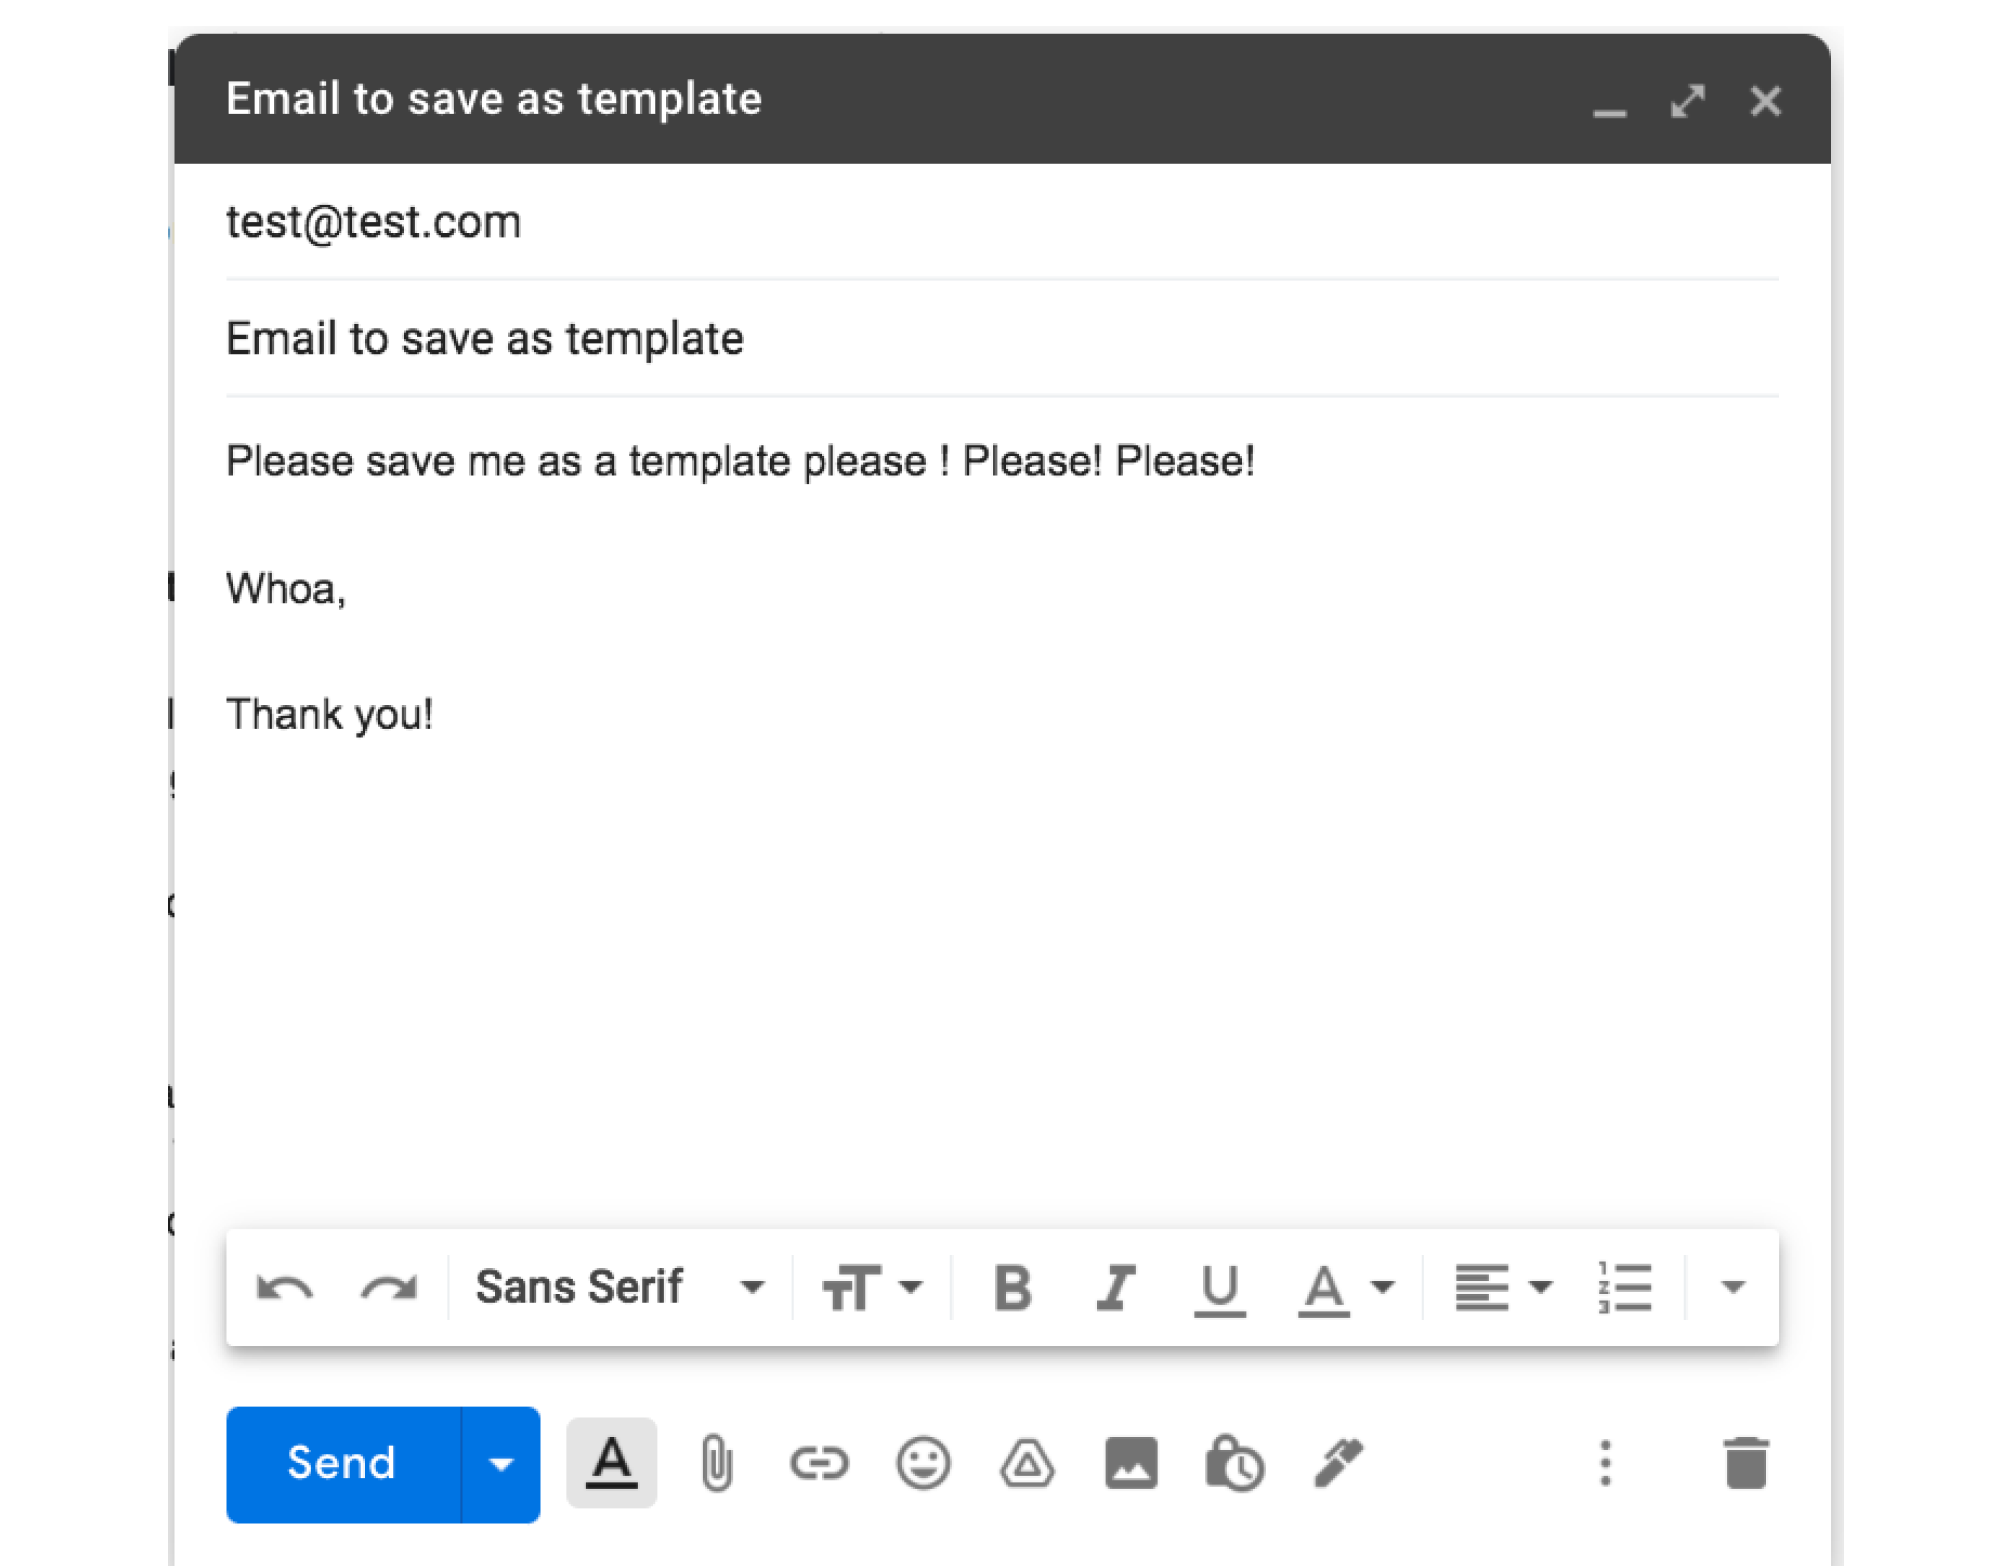 Step 3- Compose New Email